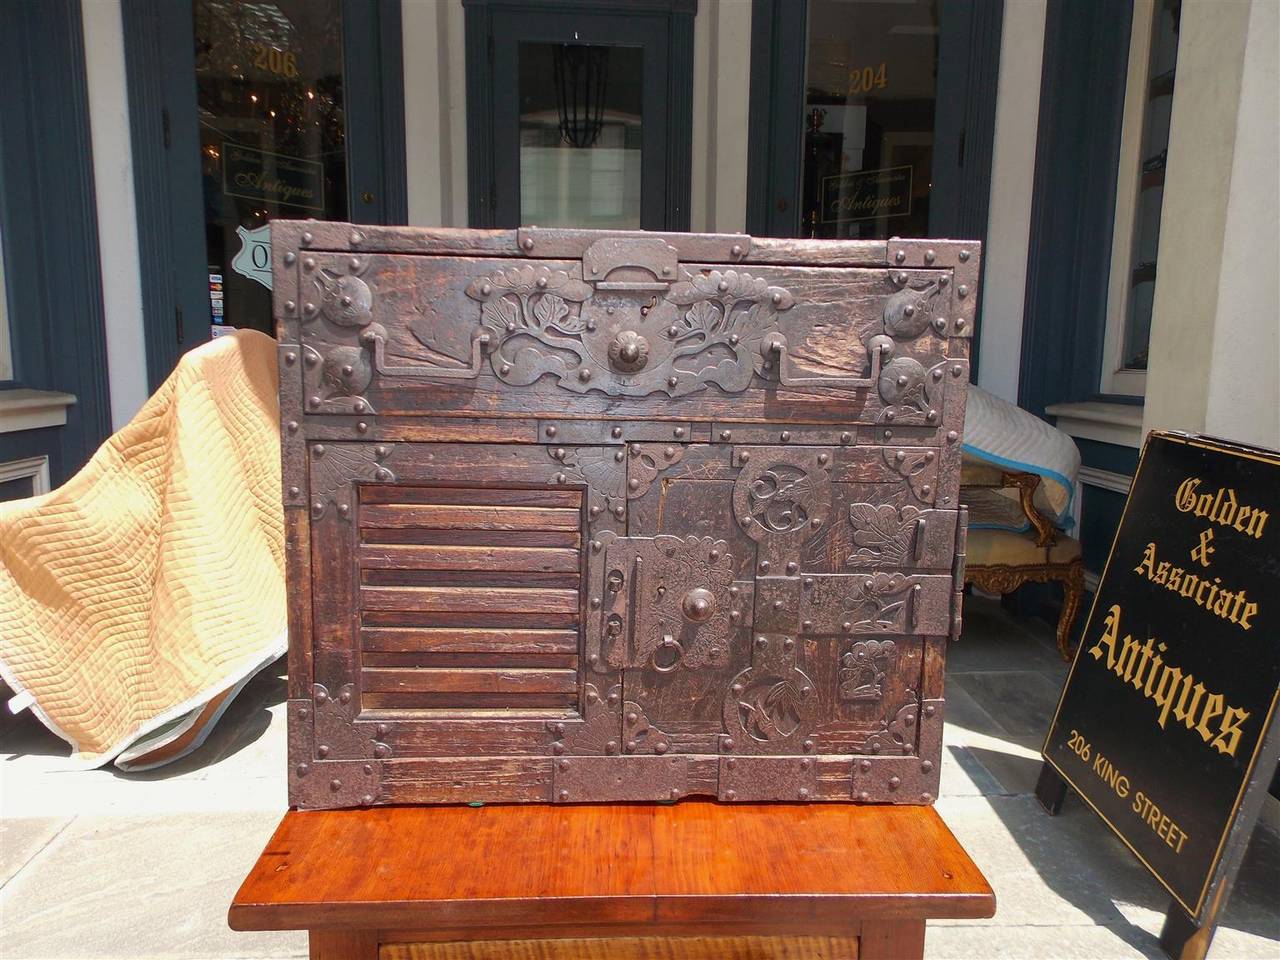 Japanese military Campaign traveling document box with fitted compartmentalized interior drawers, original wrought iron mounts, side handles, and decorative Japanese writing, Late 18th century. Stand can be made to raise if desired.